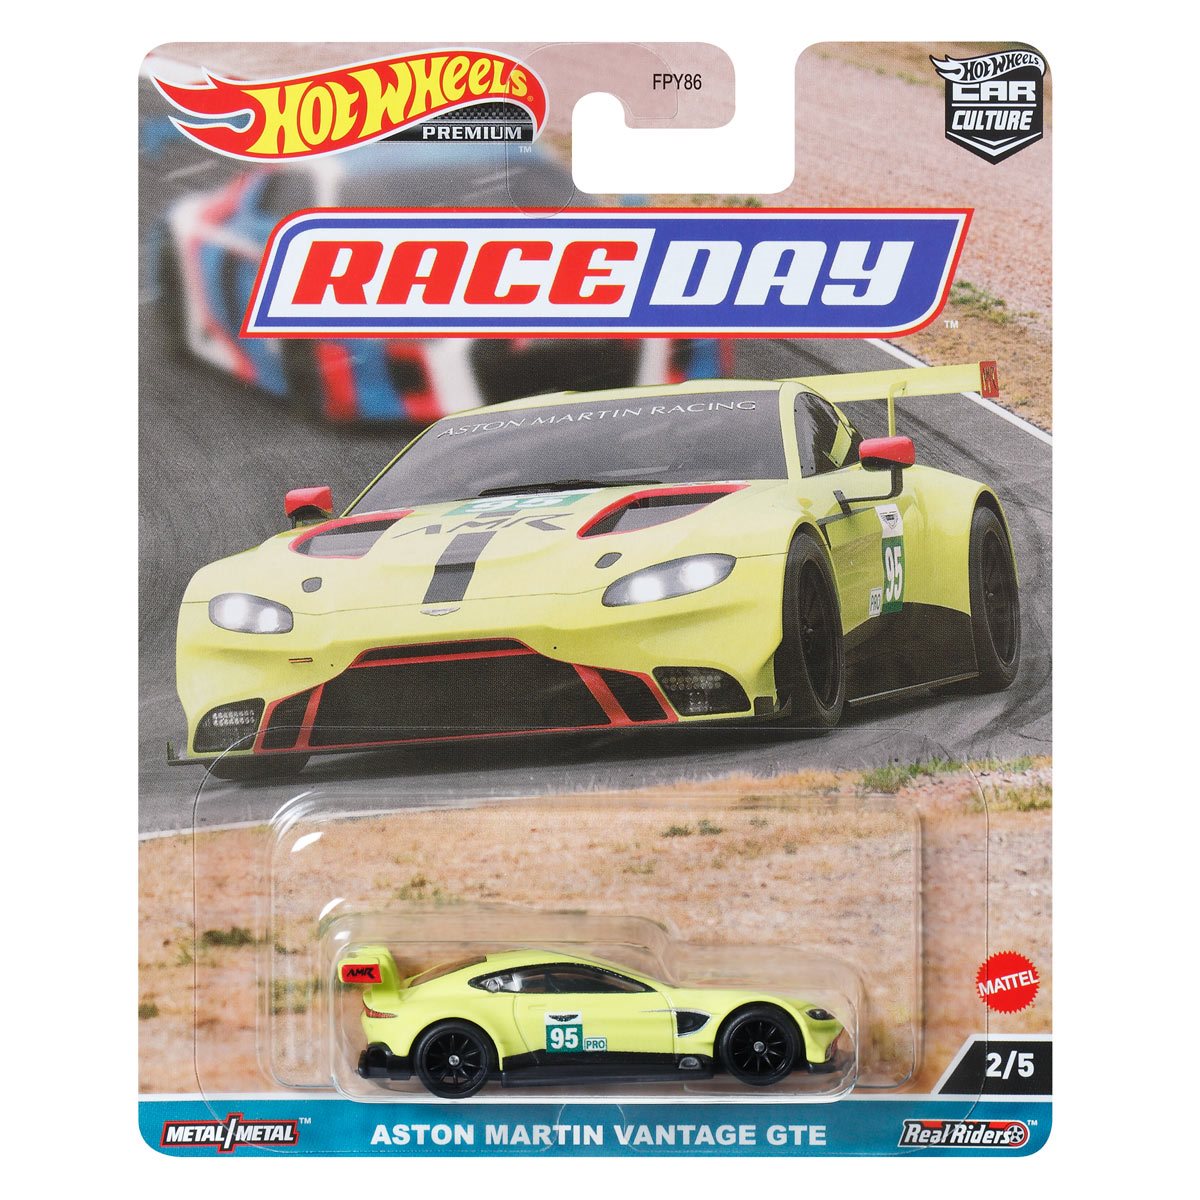 Hot Wheels Car Culture HW Race Day Mix 4 Vehicle Case of 5